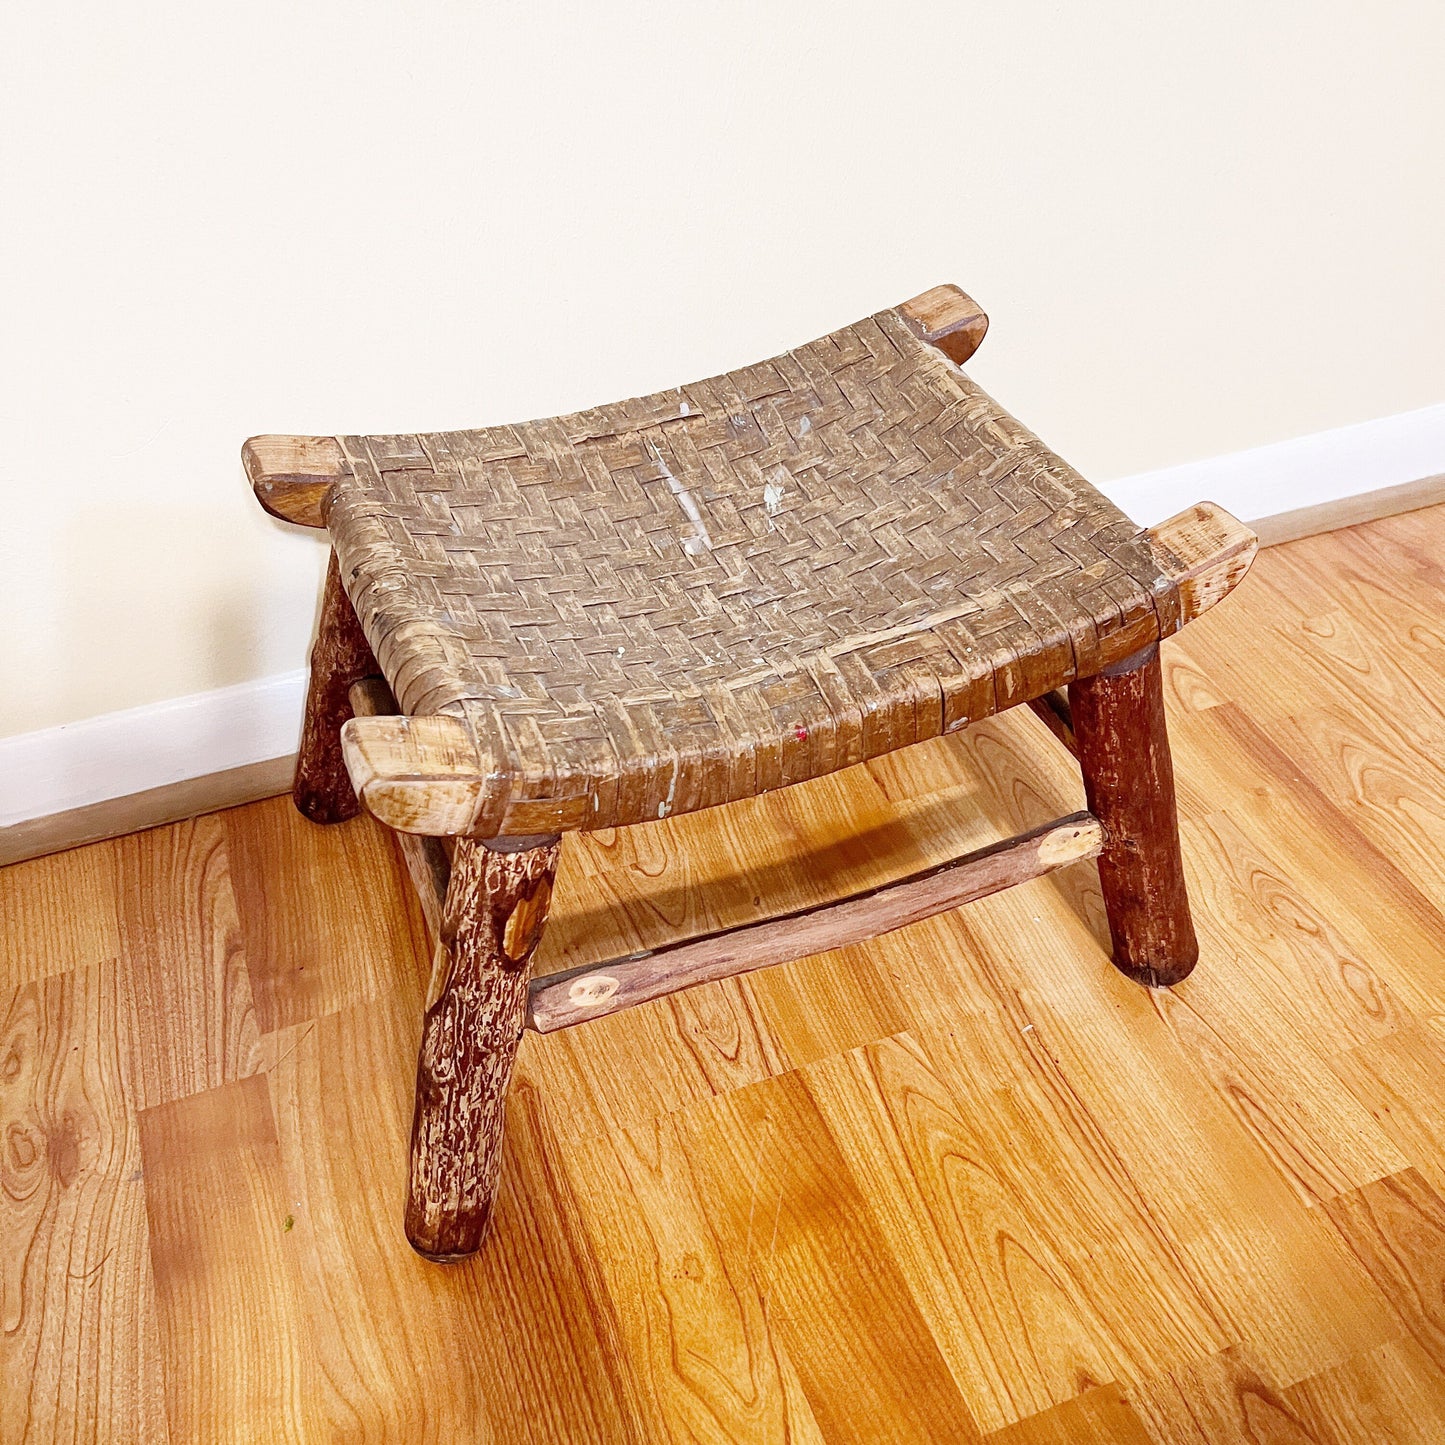 Vintage Columbus Hickory Chair Co. Foot Stool | Vintage Hickory Style Footstool with Woven Seat | Columbus Indiana Furniture